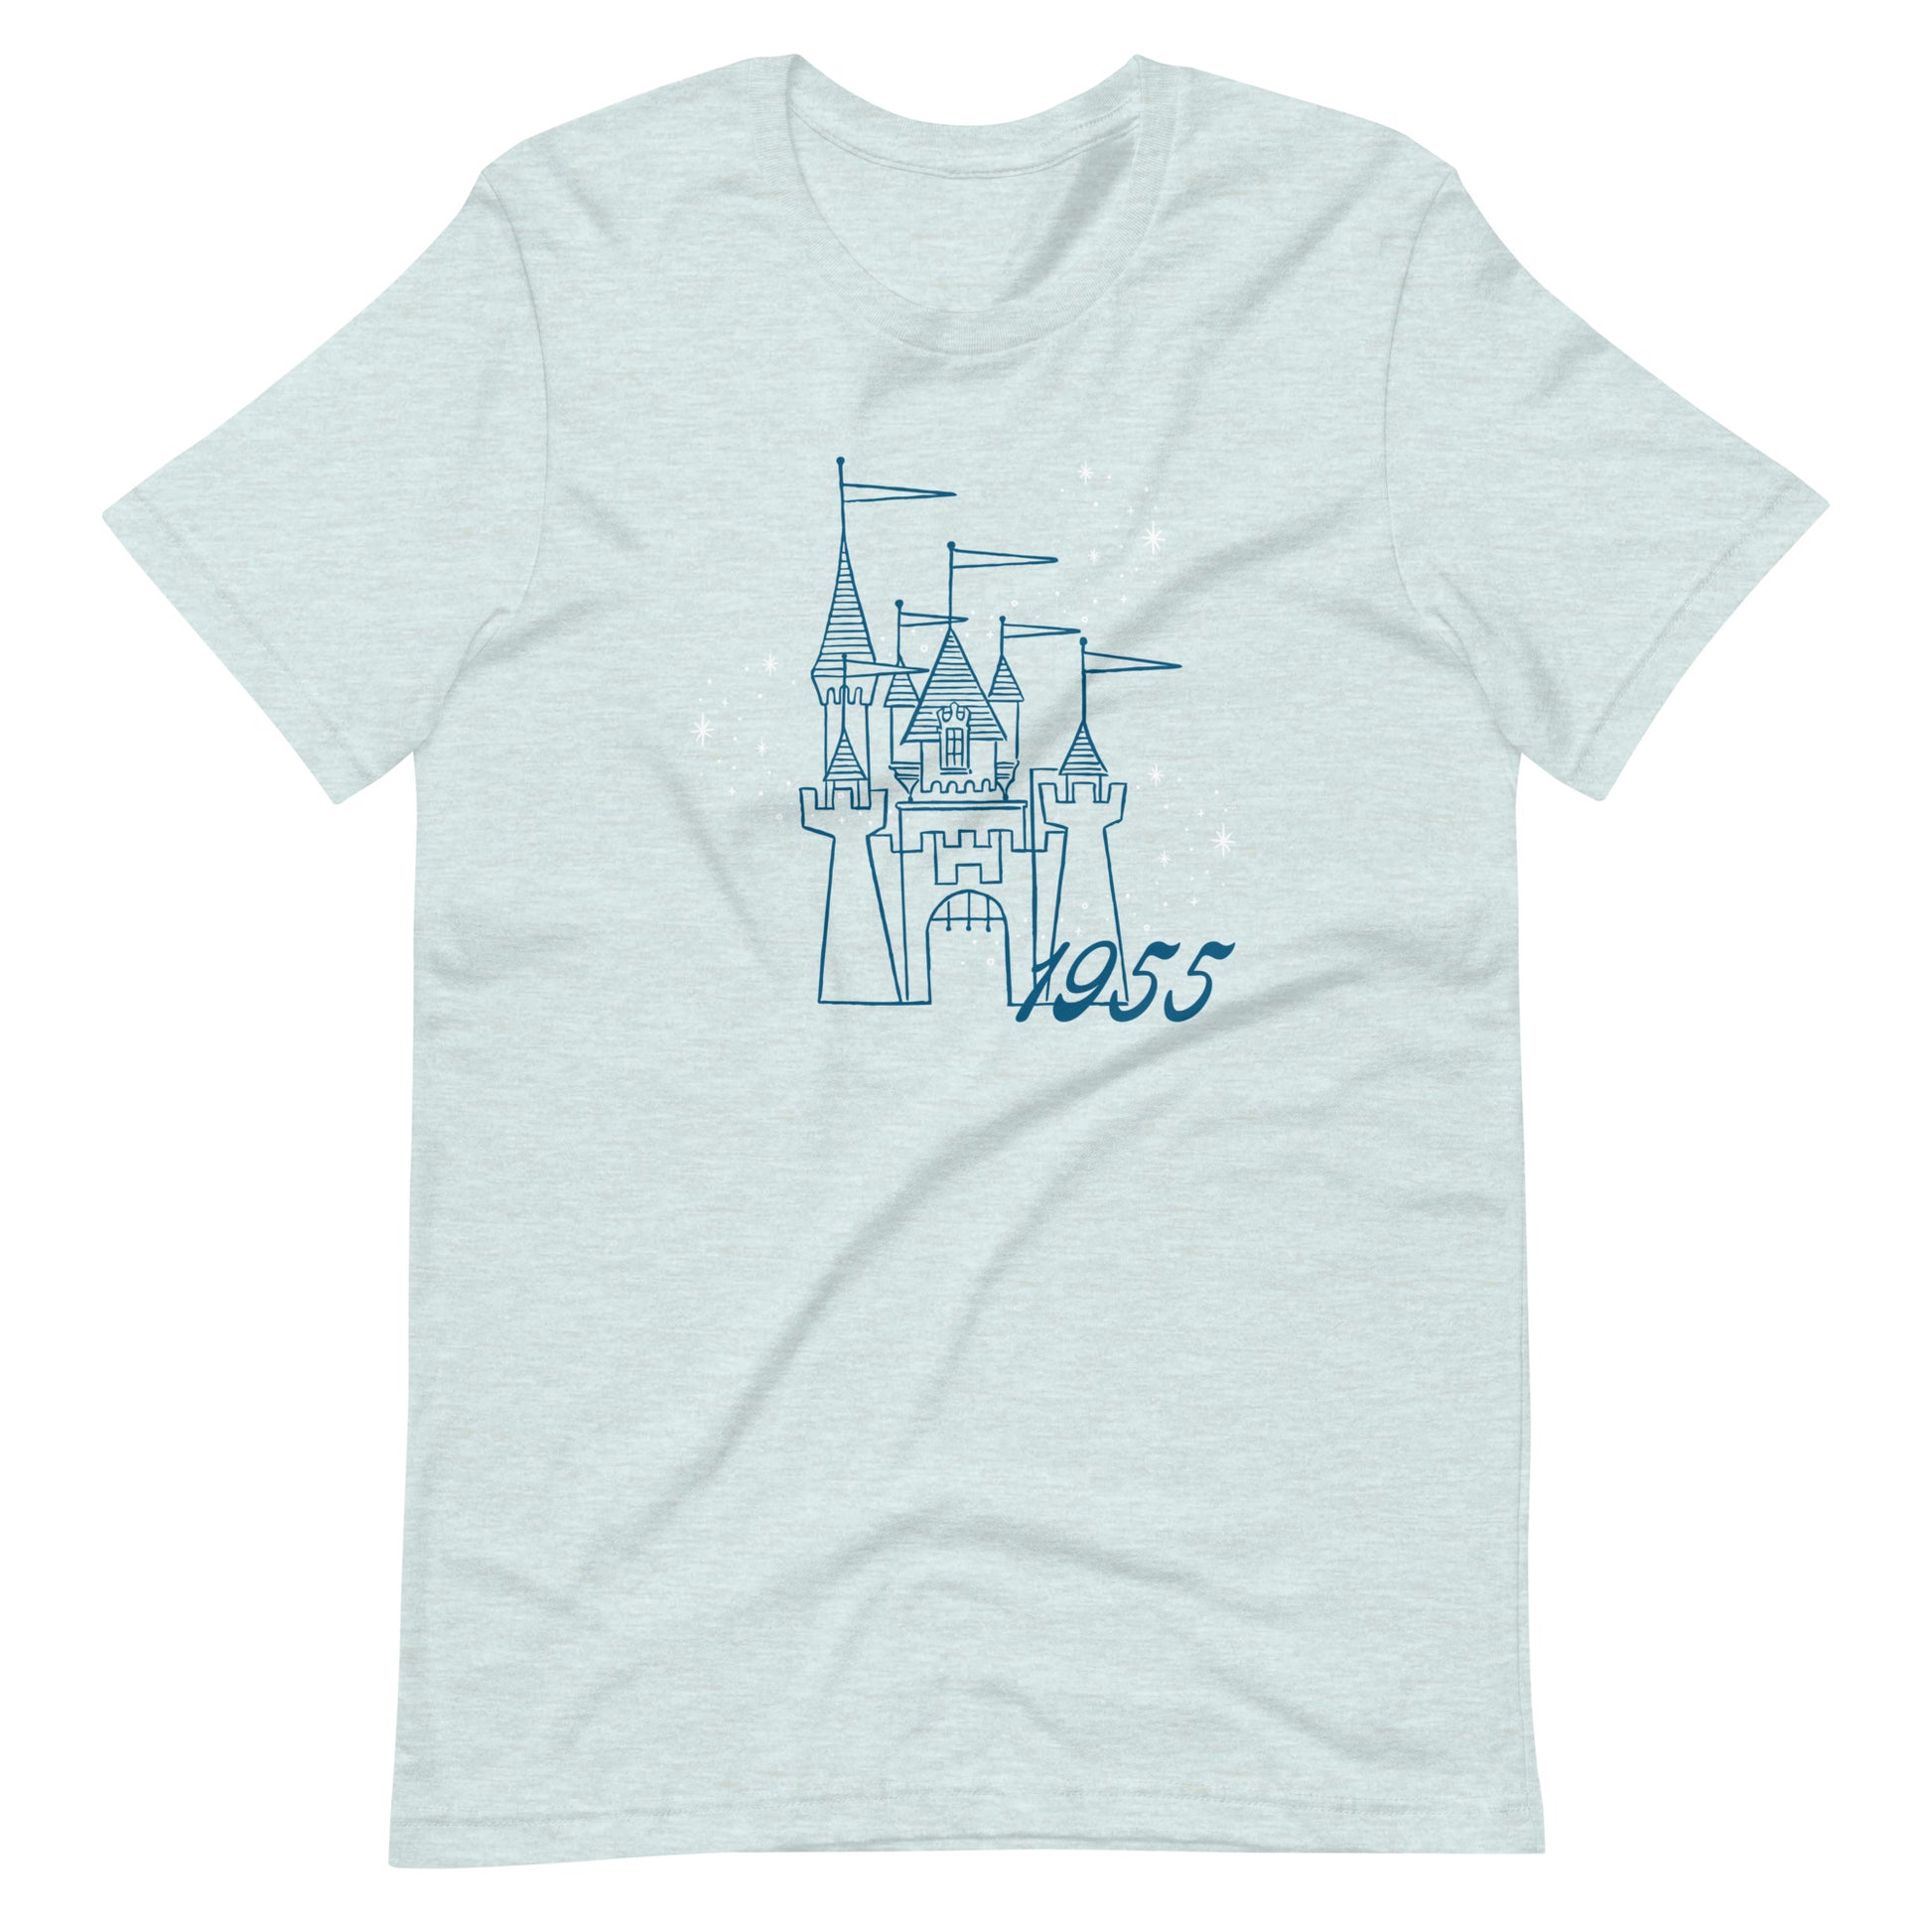 Light blue t-shirt printed with vintage style sketch of a castle with the year 1955 and pixie dust above the castle.